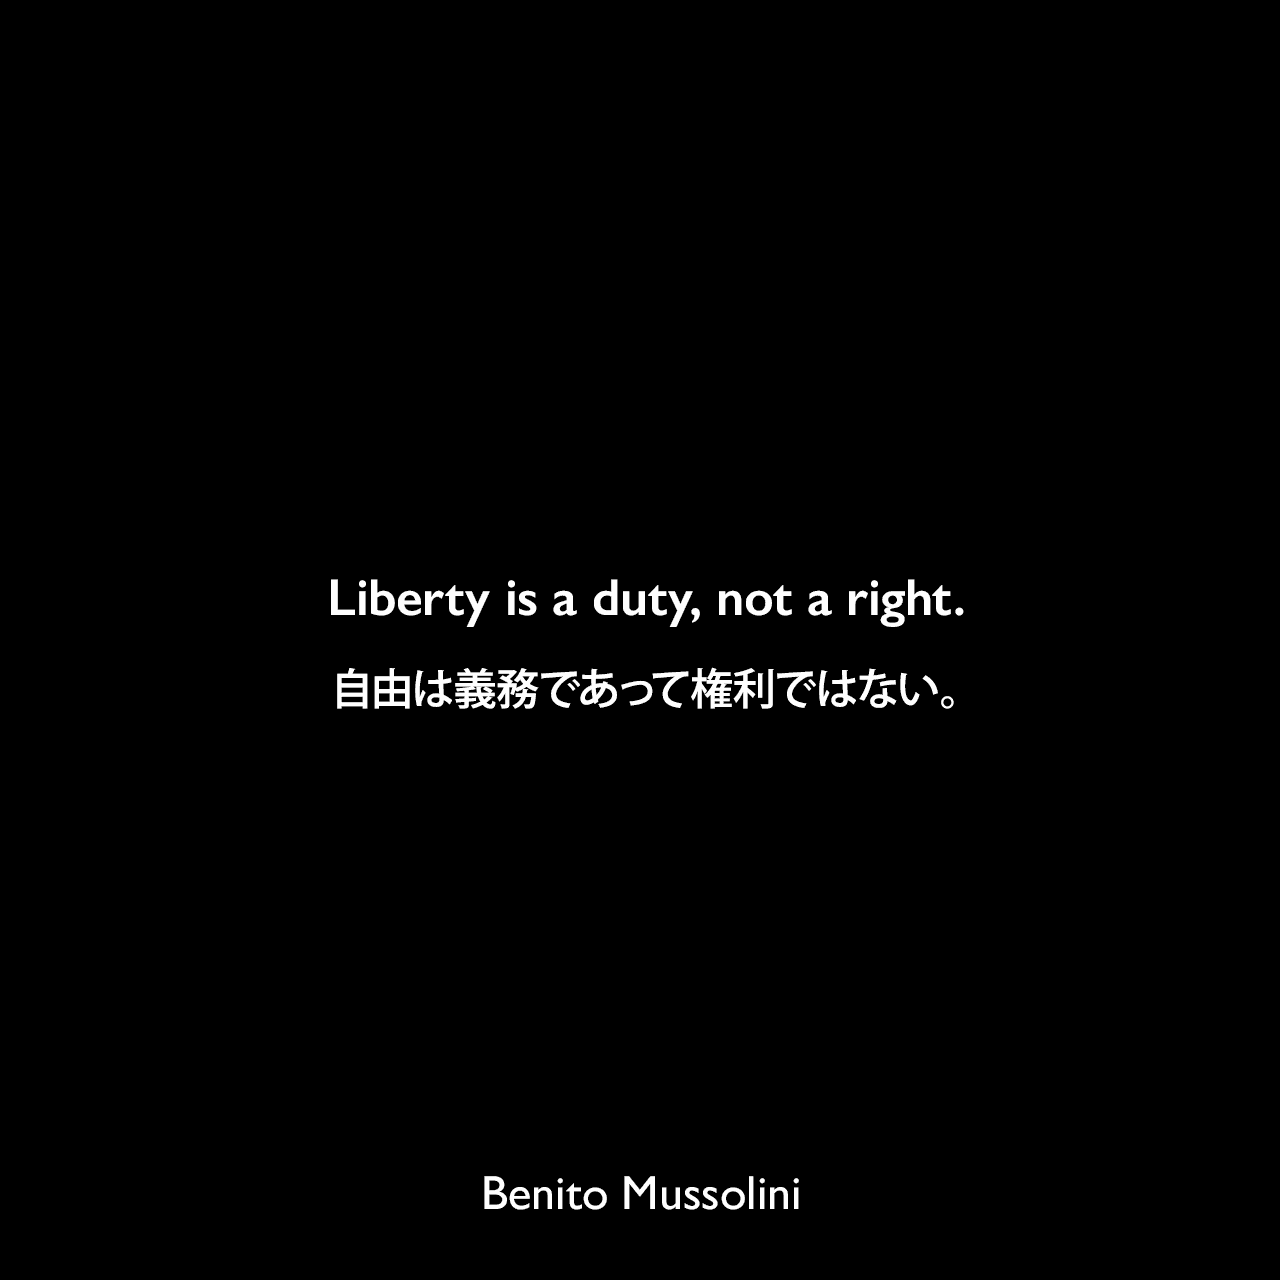 Liberty is a duty, not a right.自由は義務であって権利ではない。- 1924年3月24日のコンバットリーグの5周年記念講演よりBenito Mussolini